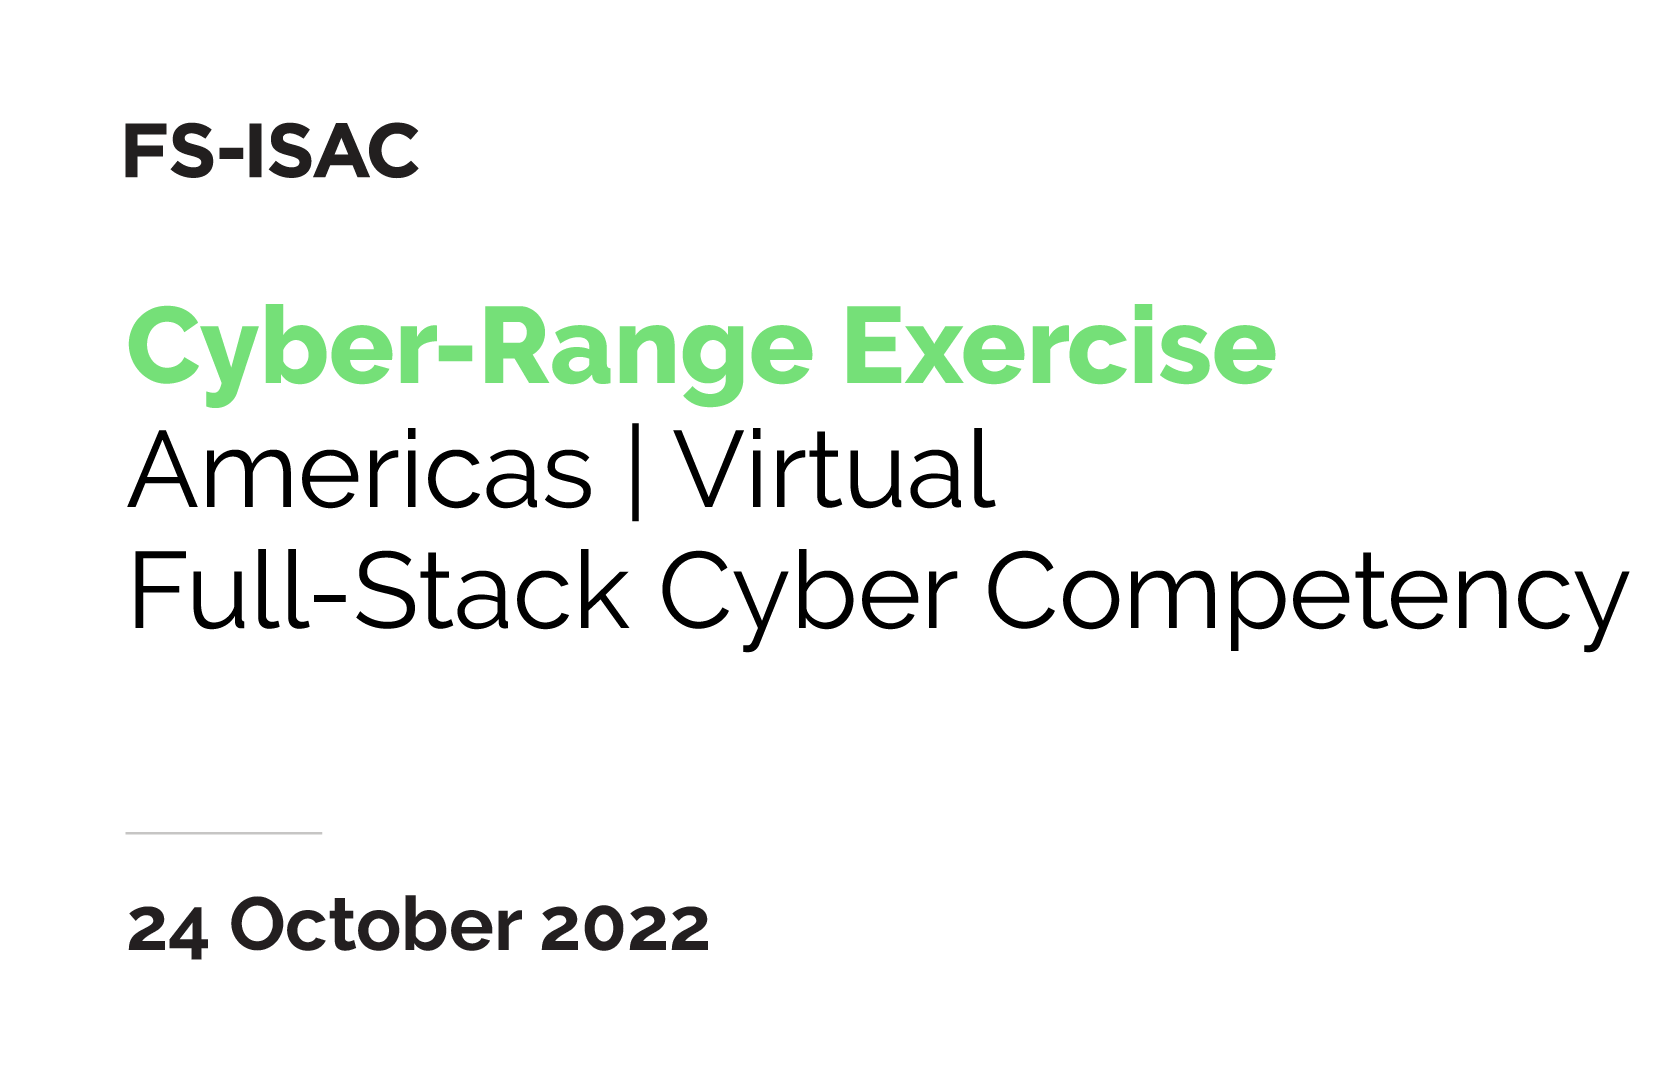 FS-ISAC Cyber Range Exercise | Full-Stack Americas | October 2022